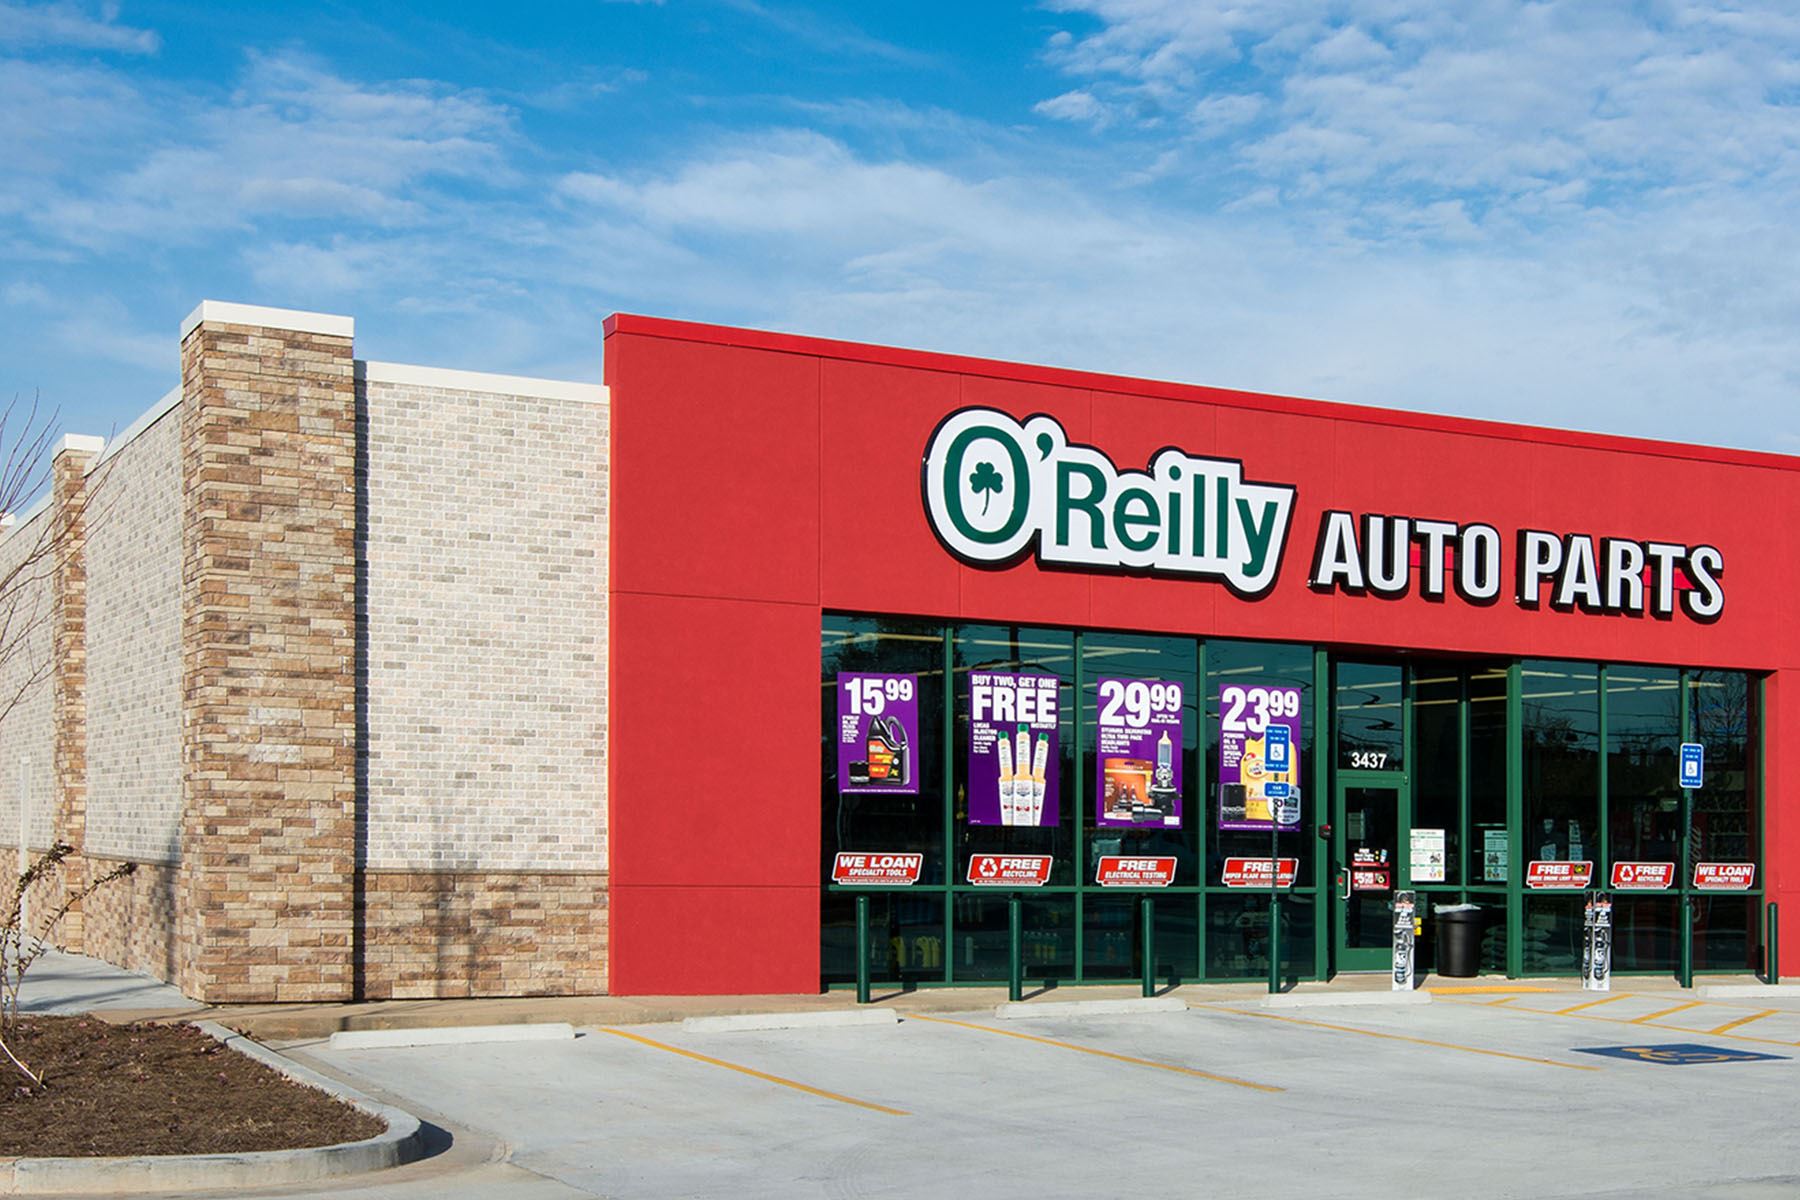 O'Reilly's Auto Parts with red entrance and LedgeStone